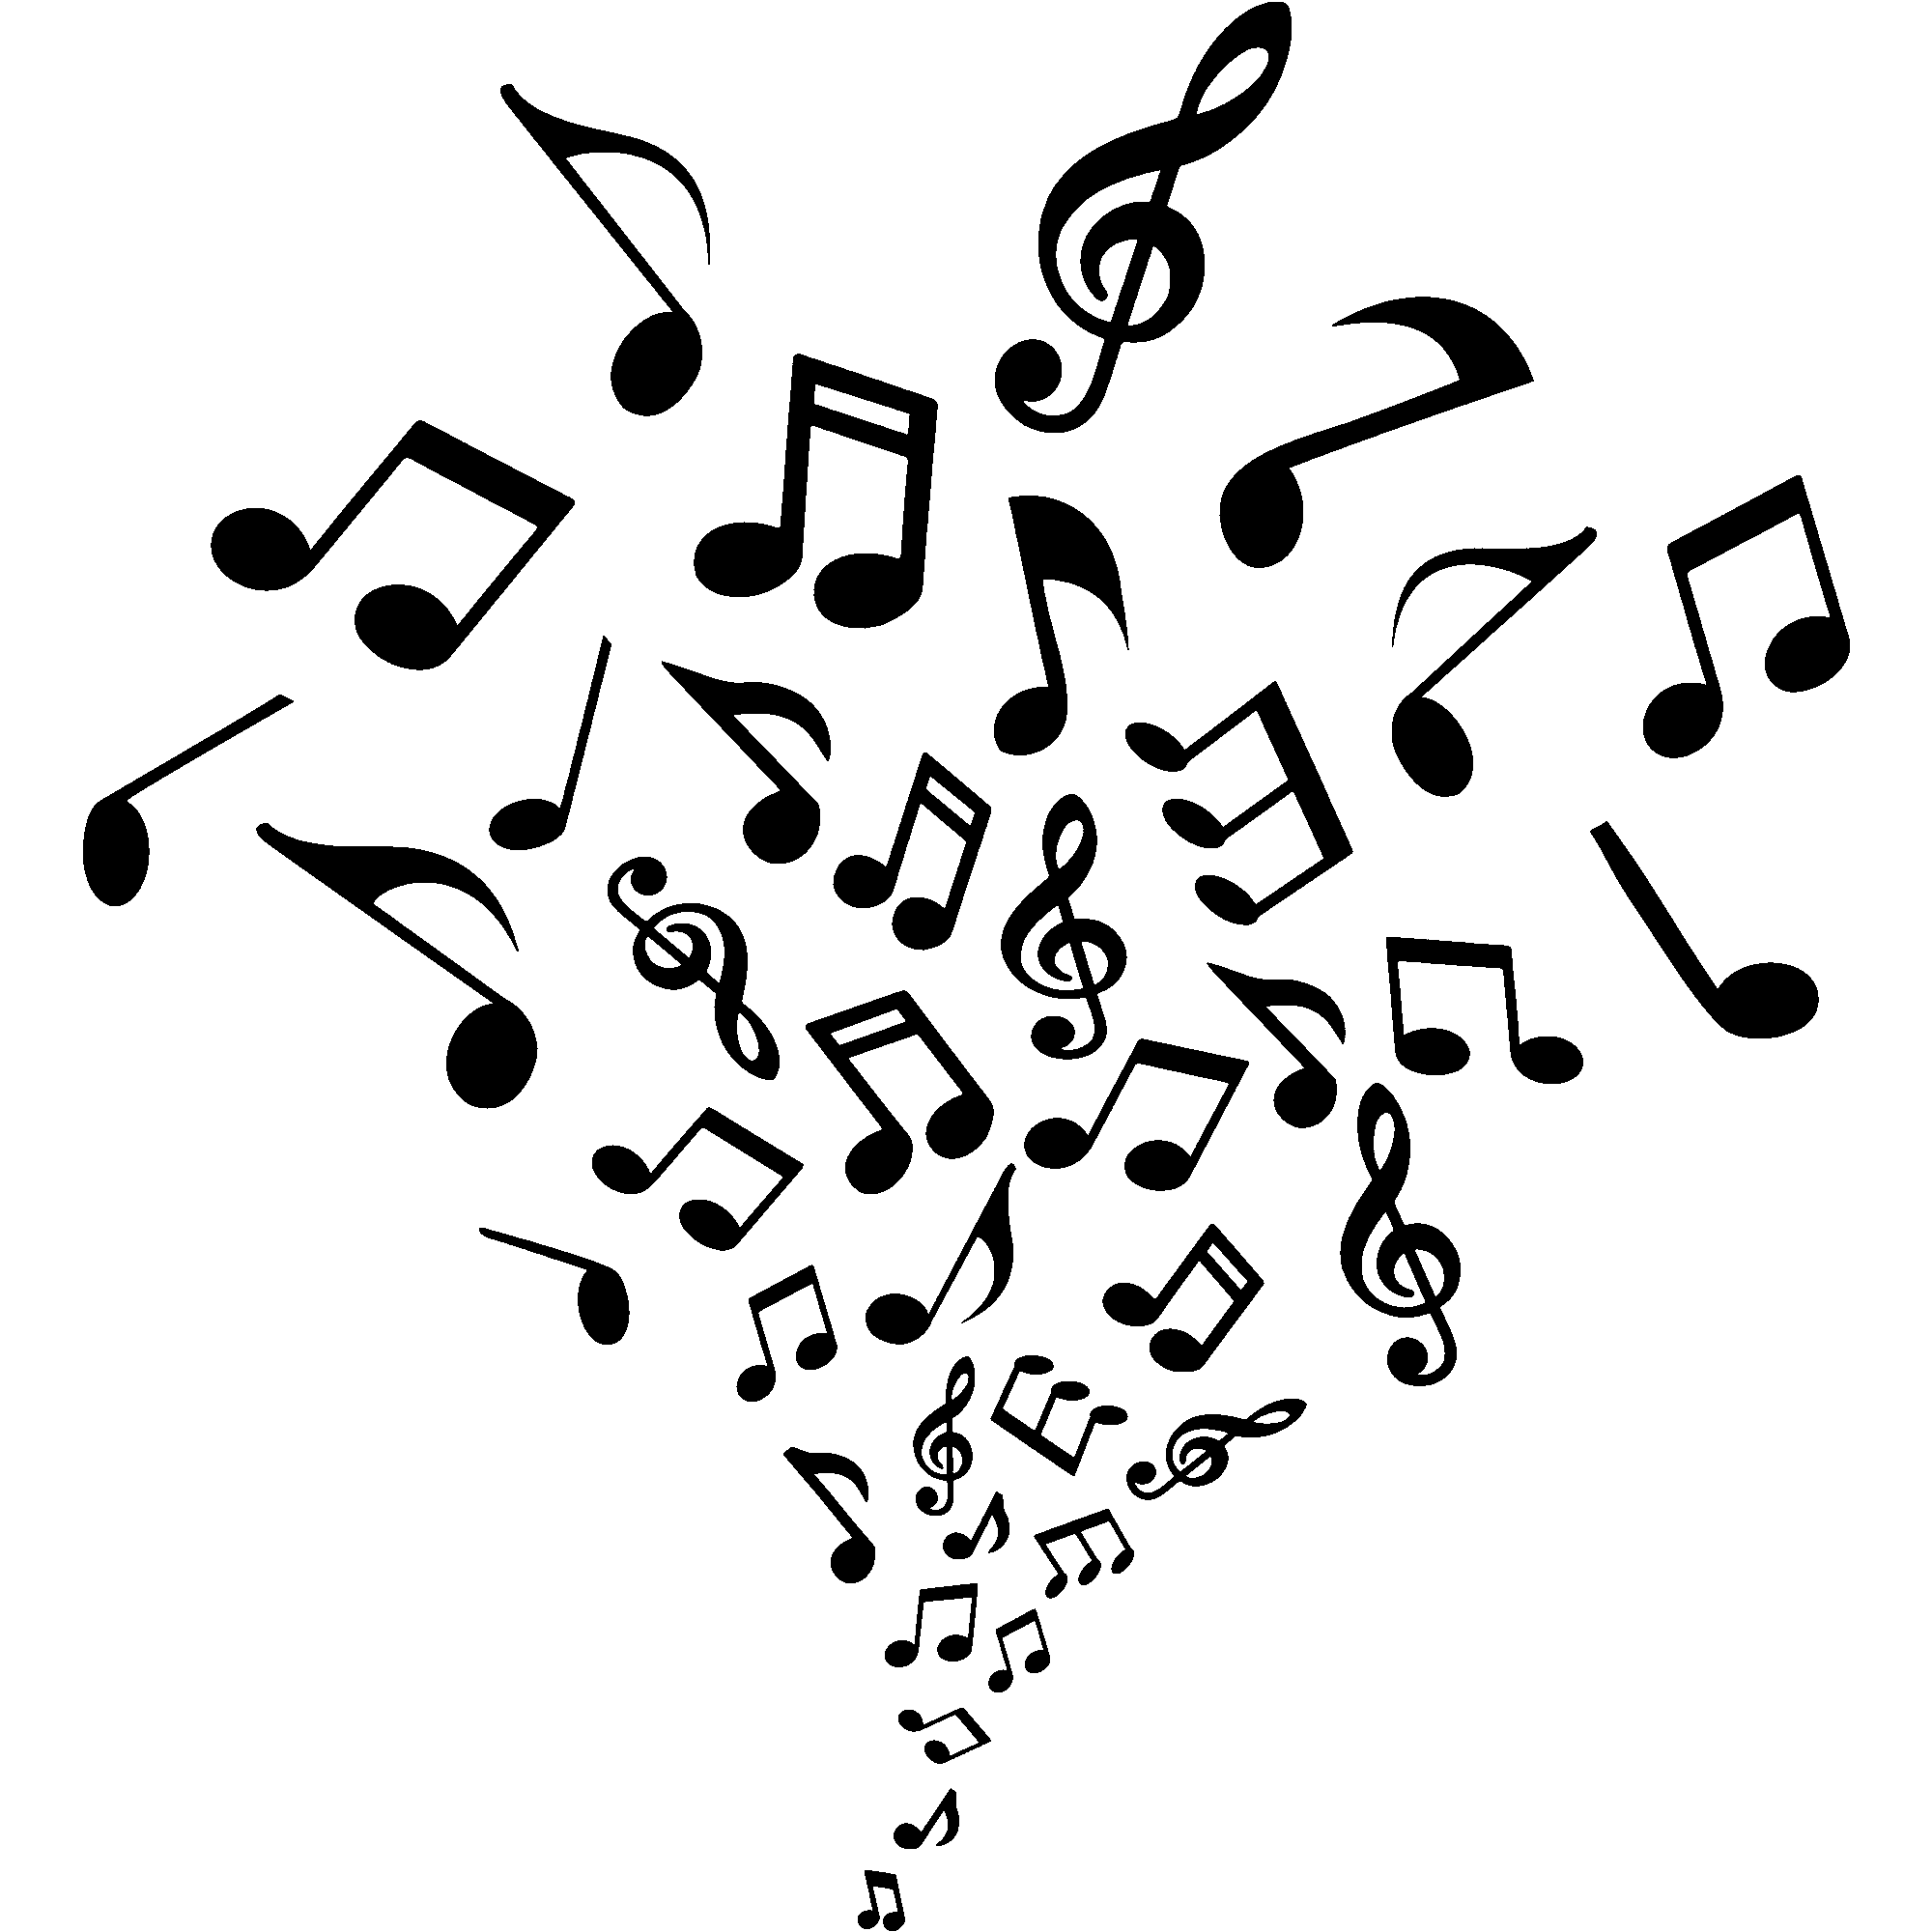 https://www.ambiance-sticker.com/images/Image/sticker-belles-notes-de-musique-ambiance-sticker-KC2997.png